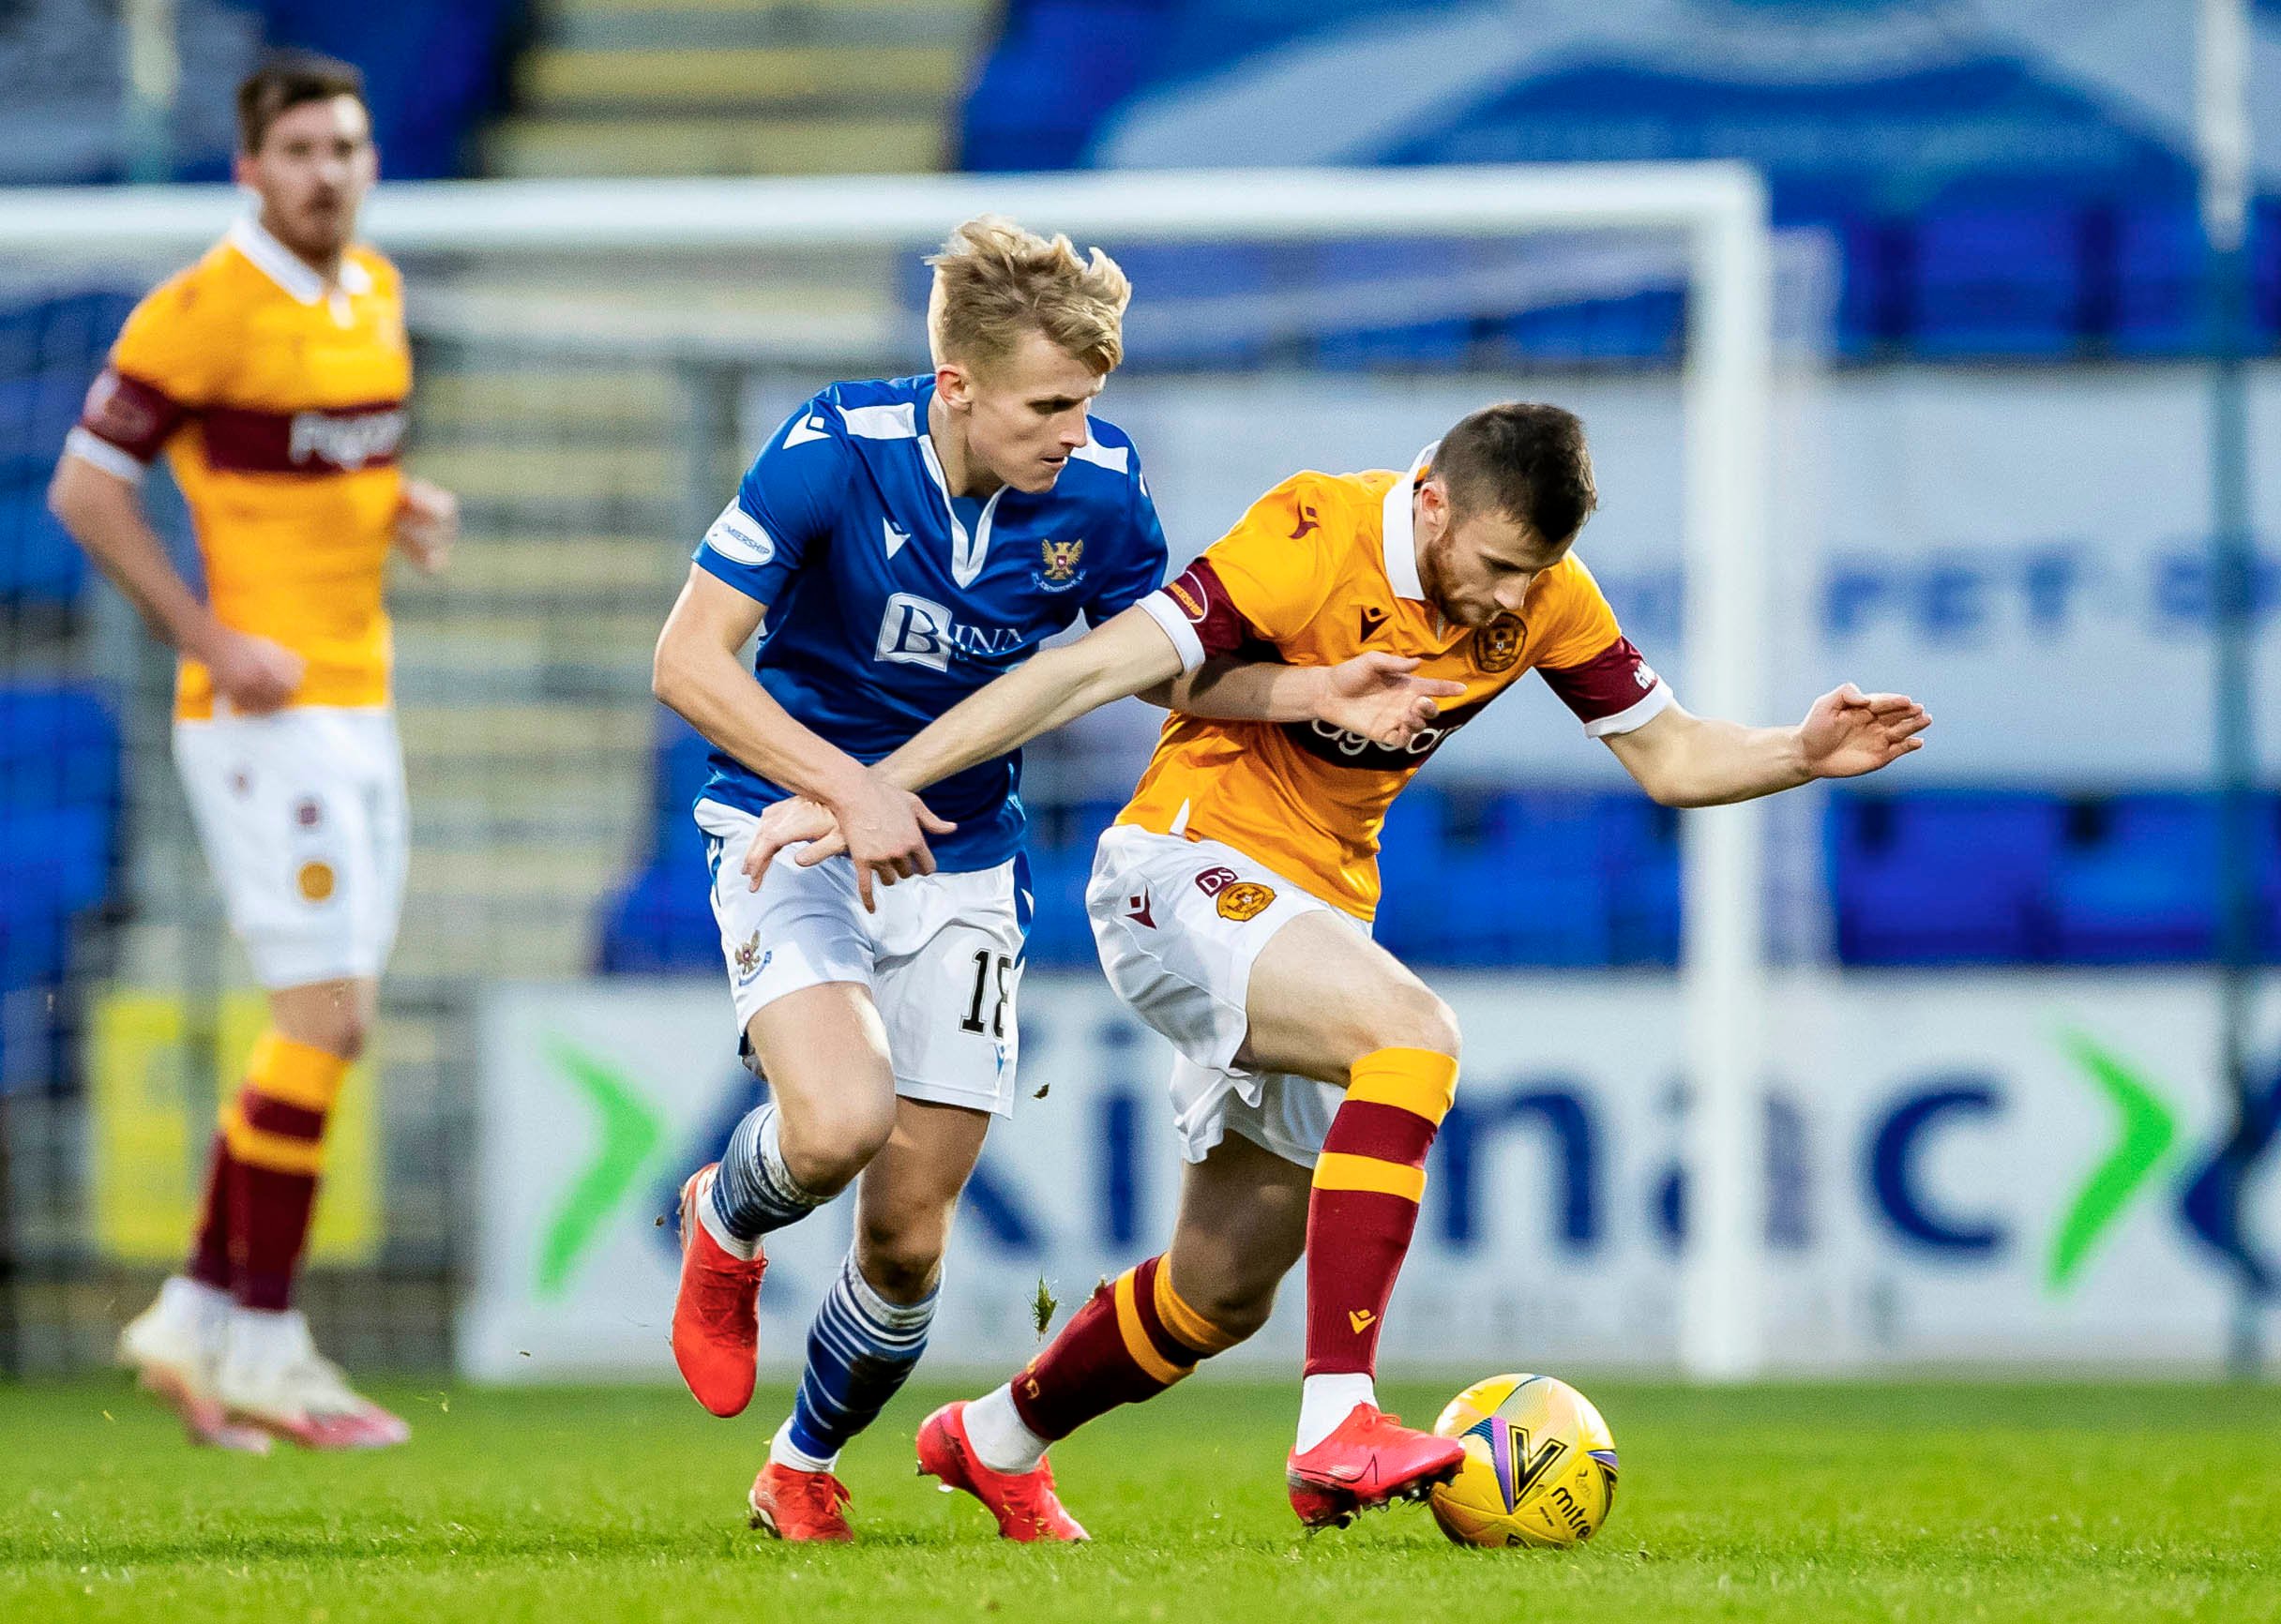 St Johnstone's Ali McCann shines again at Easter Road; was reportedly watched by Celtic on Saturday